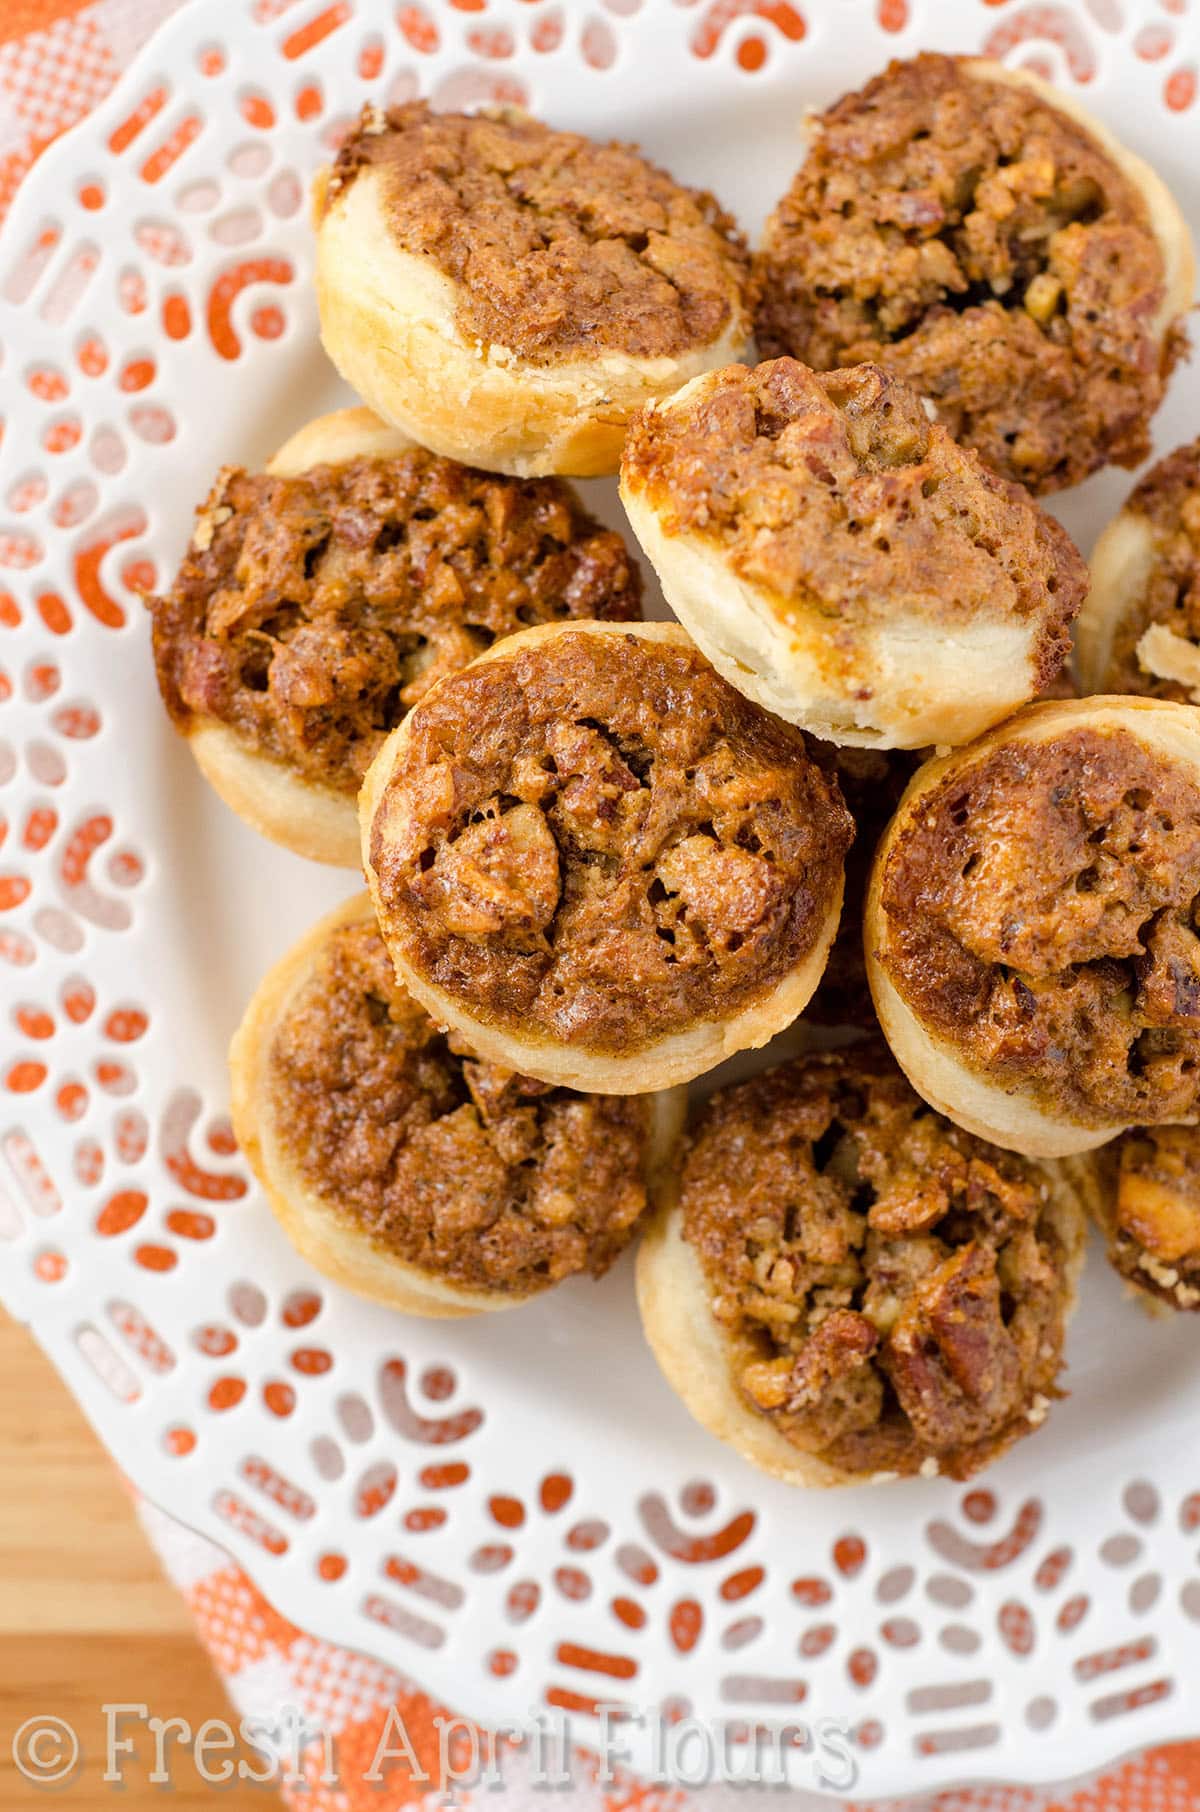 Pecan Pie Tarts: Bite-size pie tarts made with my favorite homemade pie crust and a soft and crispy pecan pie filling.